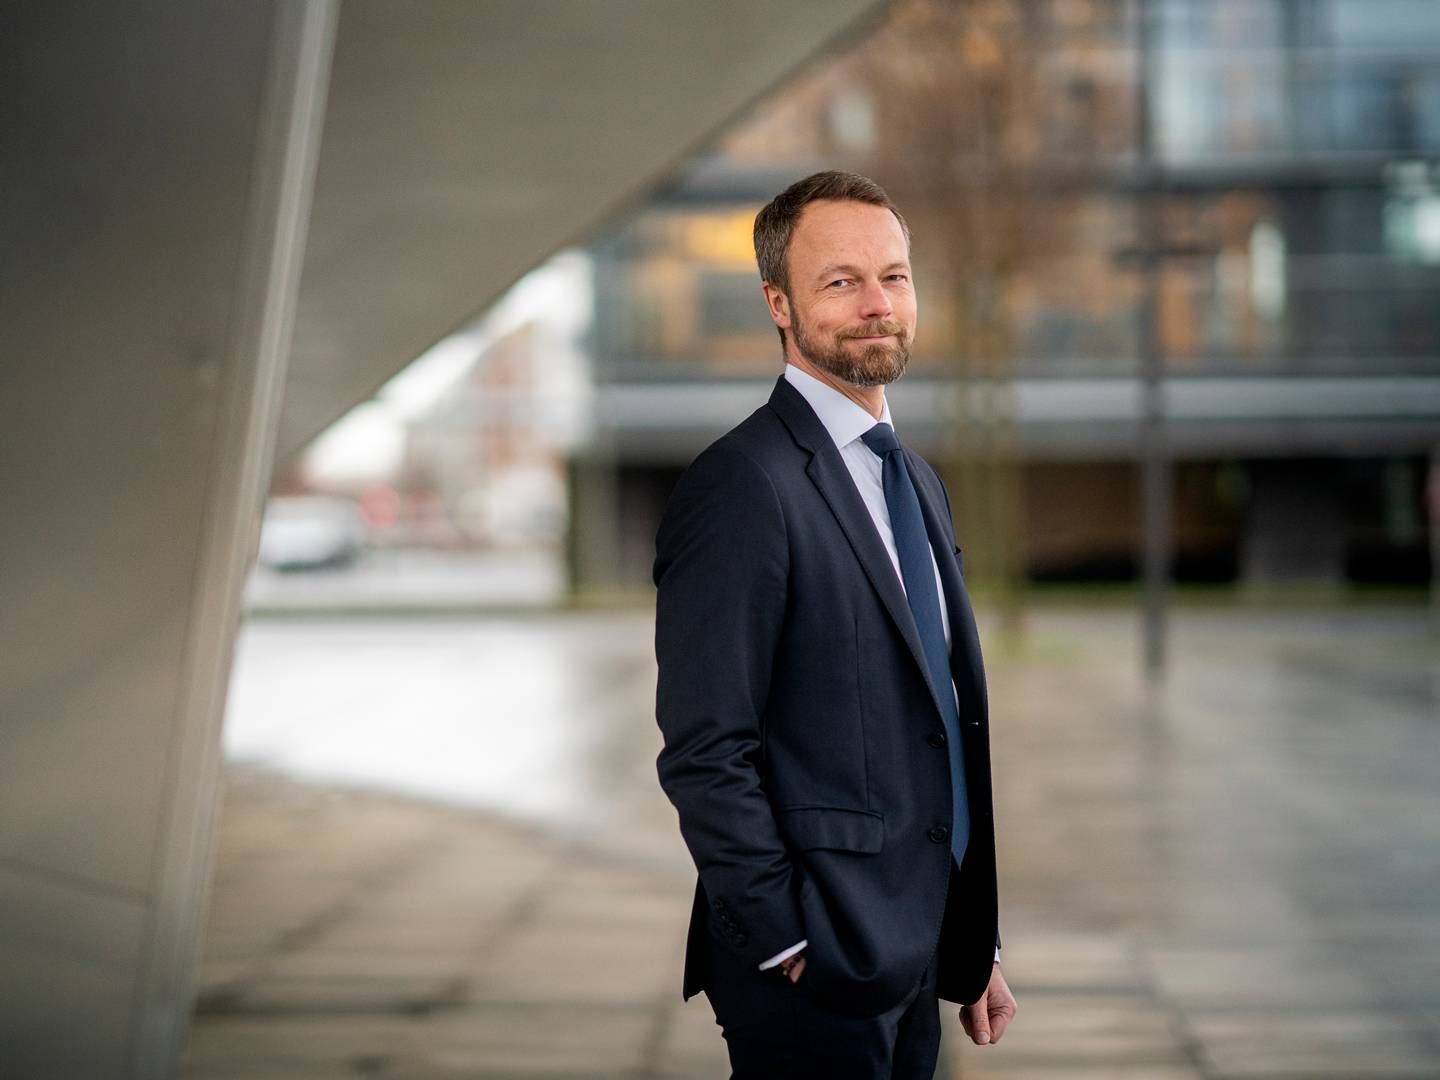 The previous Nykredit profile, Peter Kjærsgaard, has taken the helm of Formuepleje. He wants the firm's home base under control before the bank-independent asset manager looks into new international horizons. | Photo: Stine Bidstrup